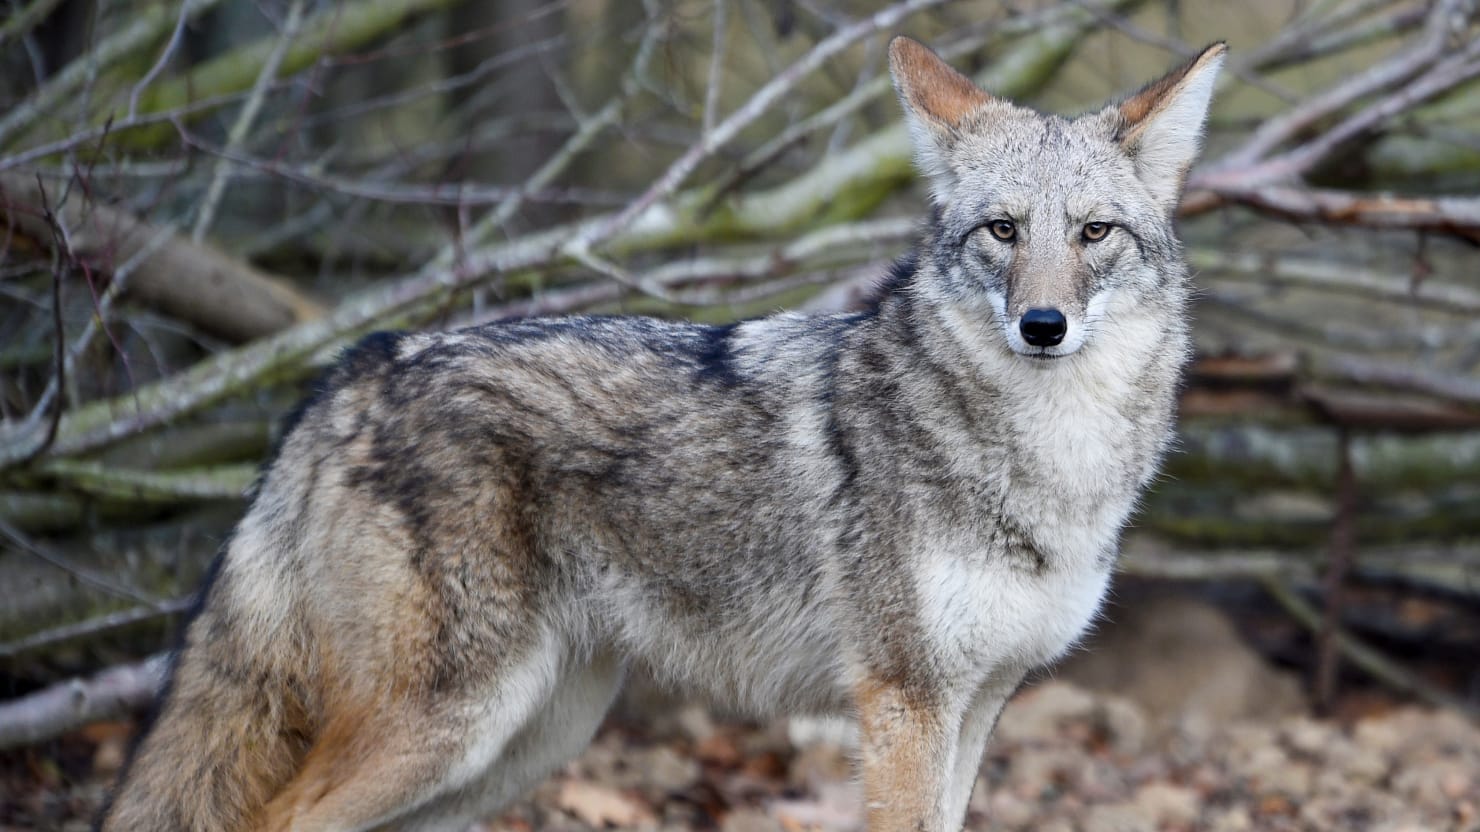 Iowa man wants coyote back as emotional support animal